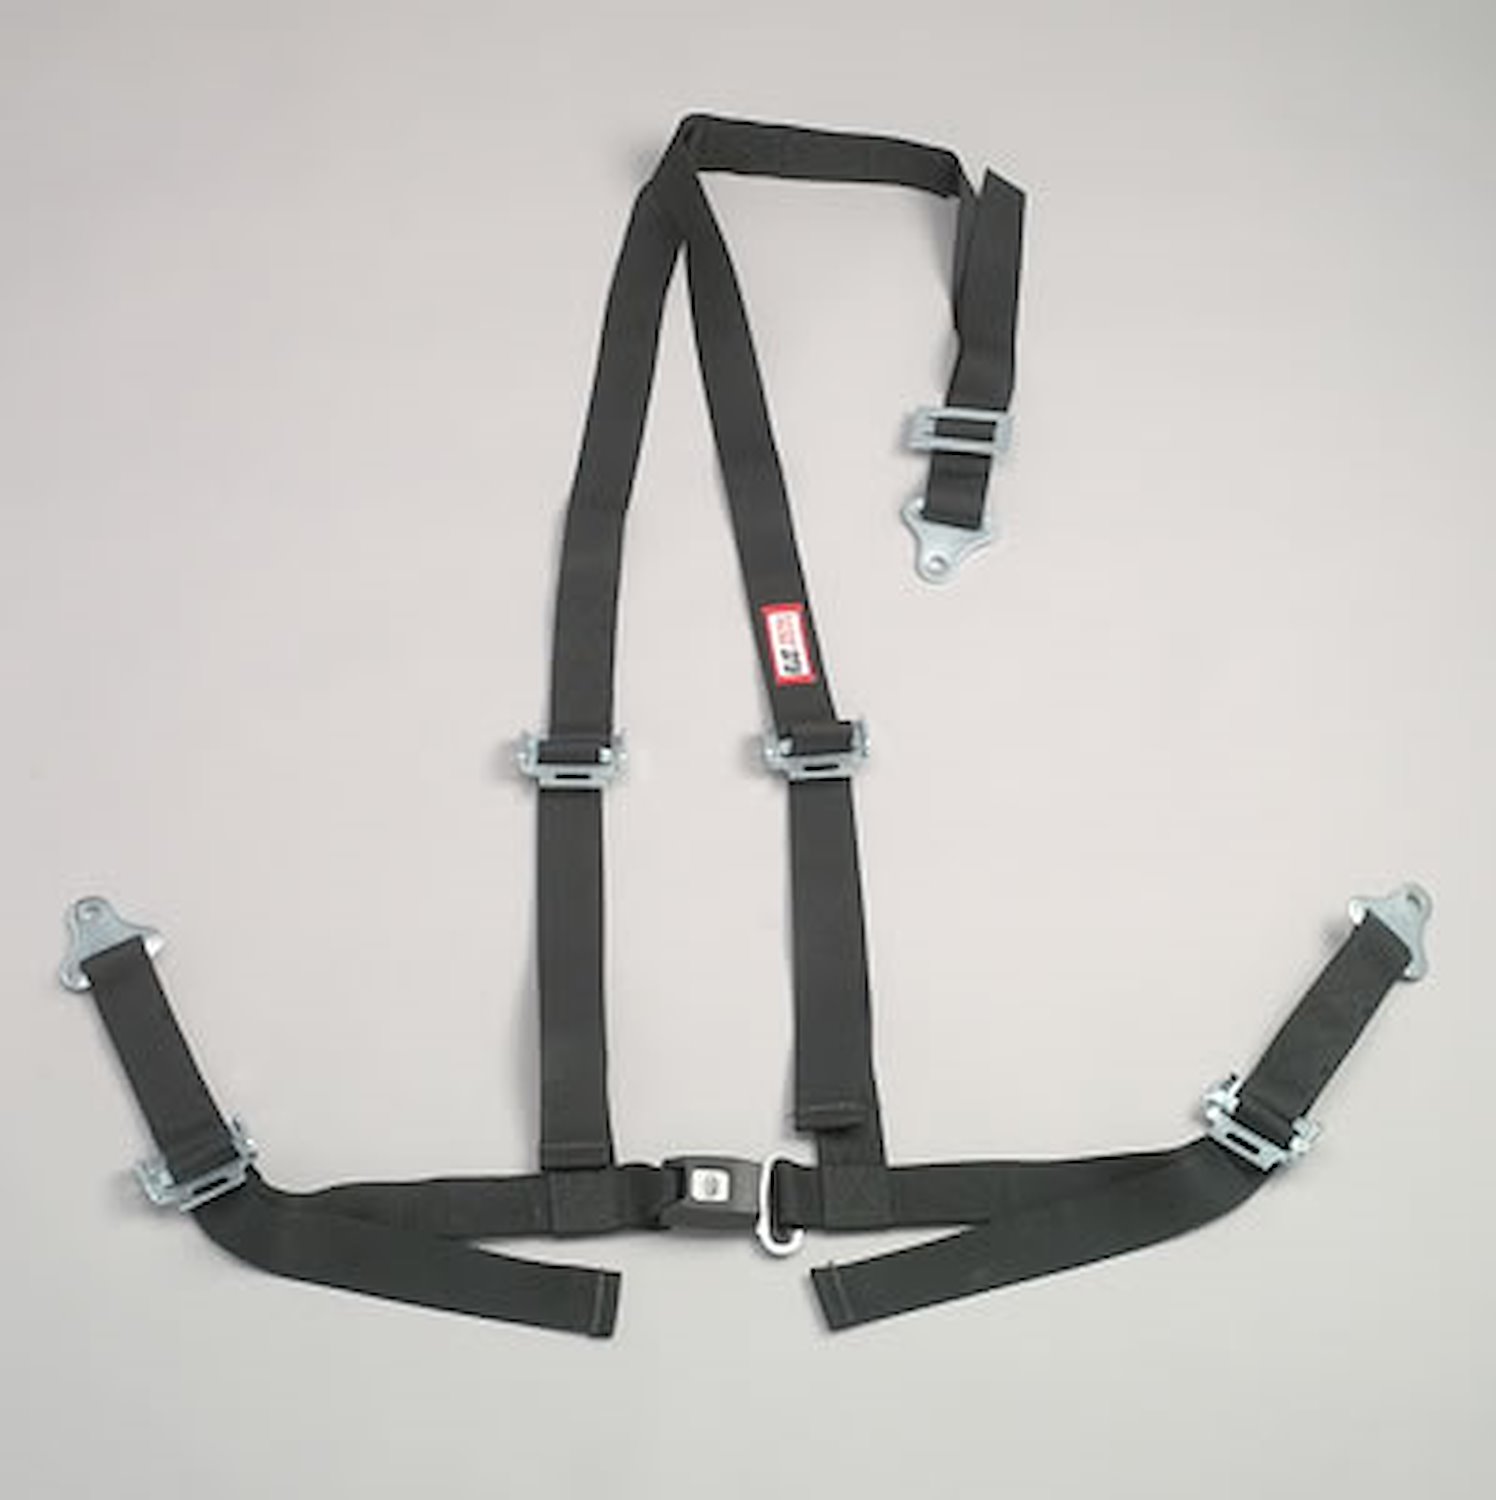 NON-SFI B&T HARNESS 2 PULL DOWN Lap Belt 2 S. H. Y FLOOR Mount ALL WRAP ENDS w/STERNUM STRAP YELLOW